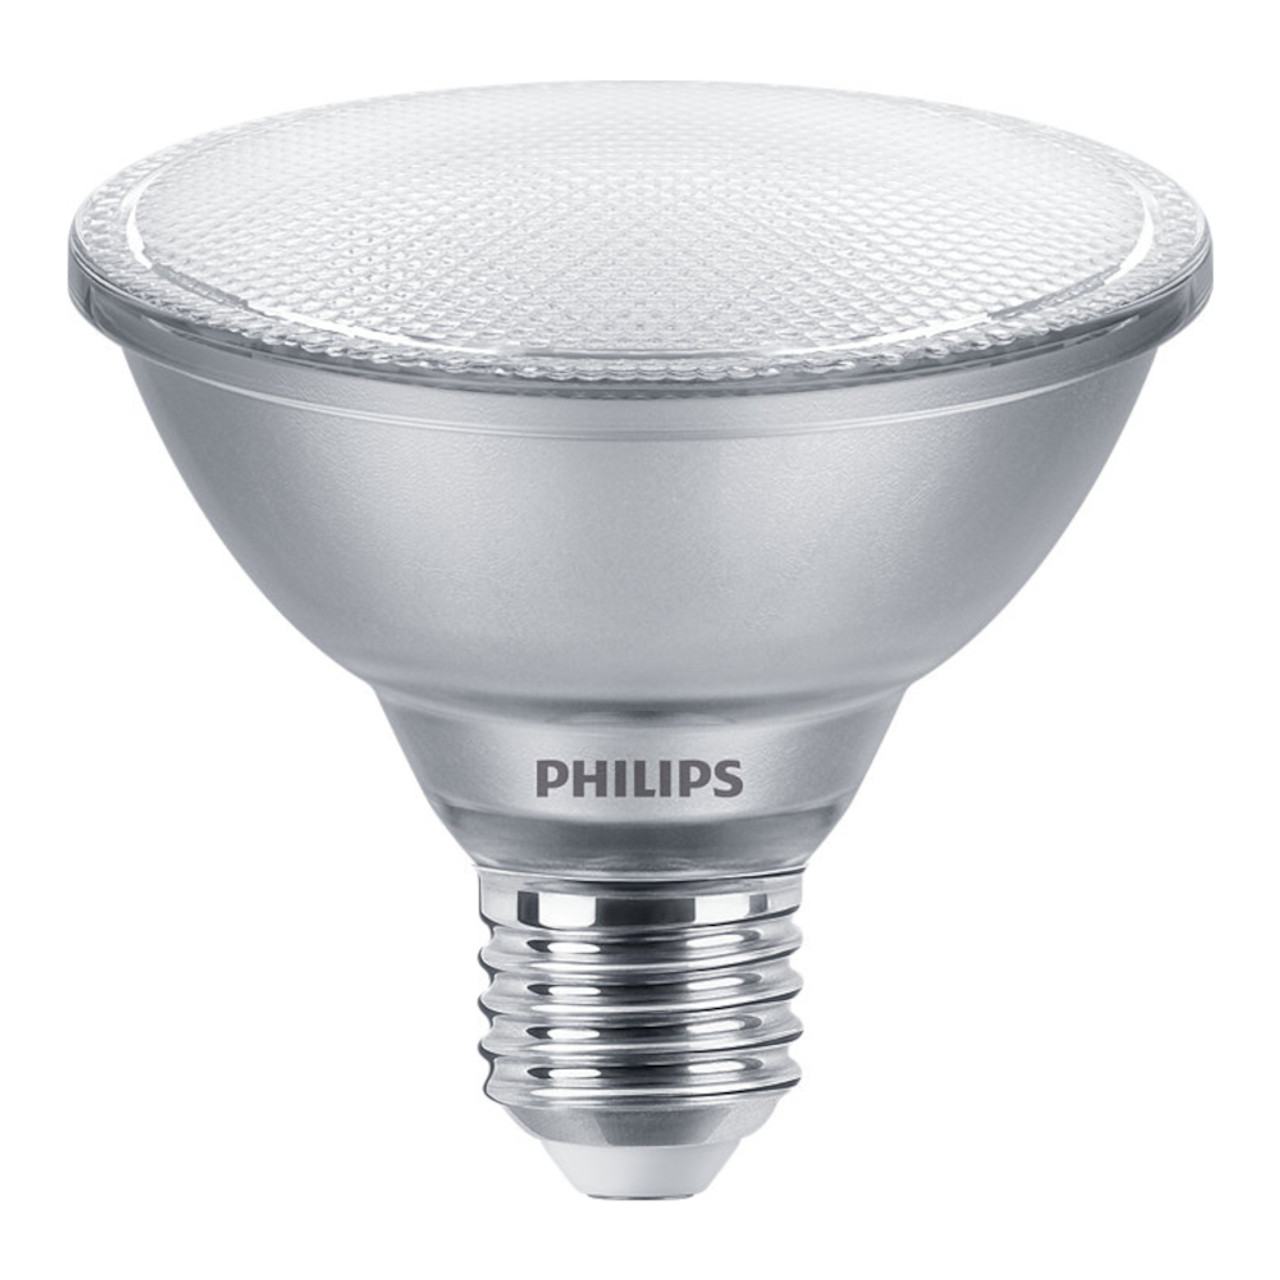 Philips LED PAR30 ES 9.5W (75W) 4000K RA90 25 Degrees Dimmable